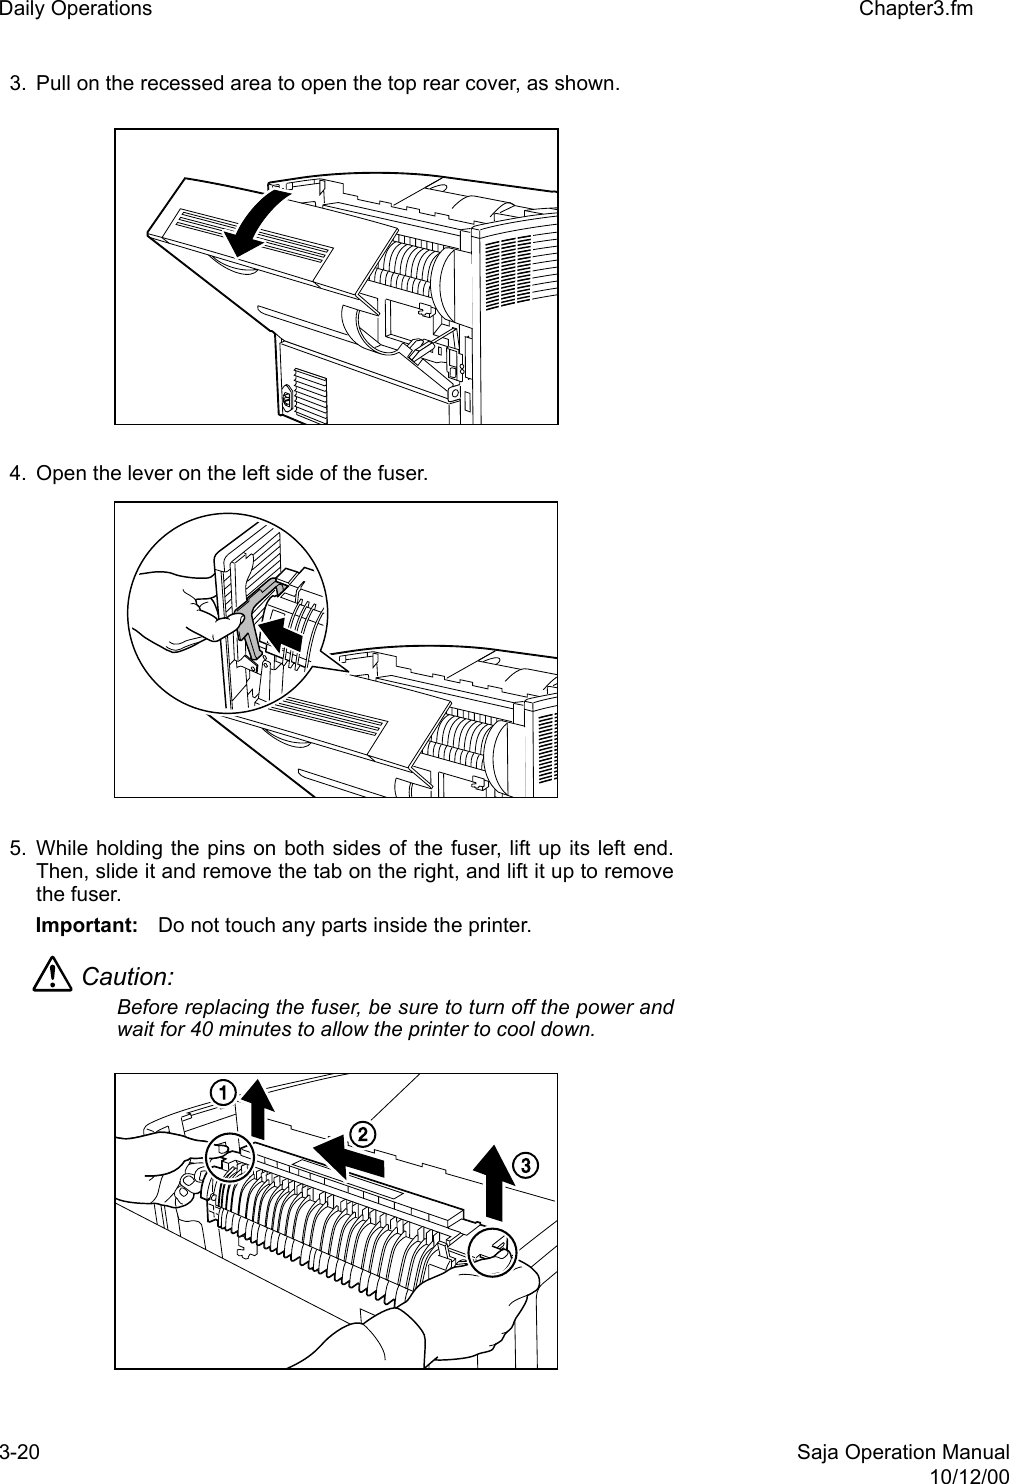 3-20 Saja Operation Manual10/12/00Daily Operations Chapter3.fm3. Pull on the recessed area to open the top rear cover, as shown. 4. Open the lever on the left side of the fuser. 5. While holding the pins on both sides of the fuser, lift up its left end.Then, slide it and remove the tab on the right, and lift it up to removethe fuser.Important: Do not touch any parts inside the printer. Caution: Before replacing the fuser, be sure to turn off the power andwait for 40 minutes to allow the printer to cool down.